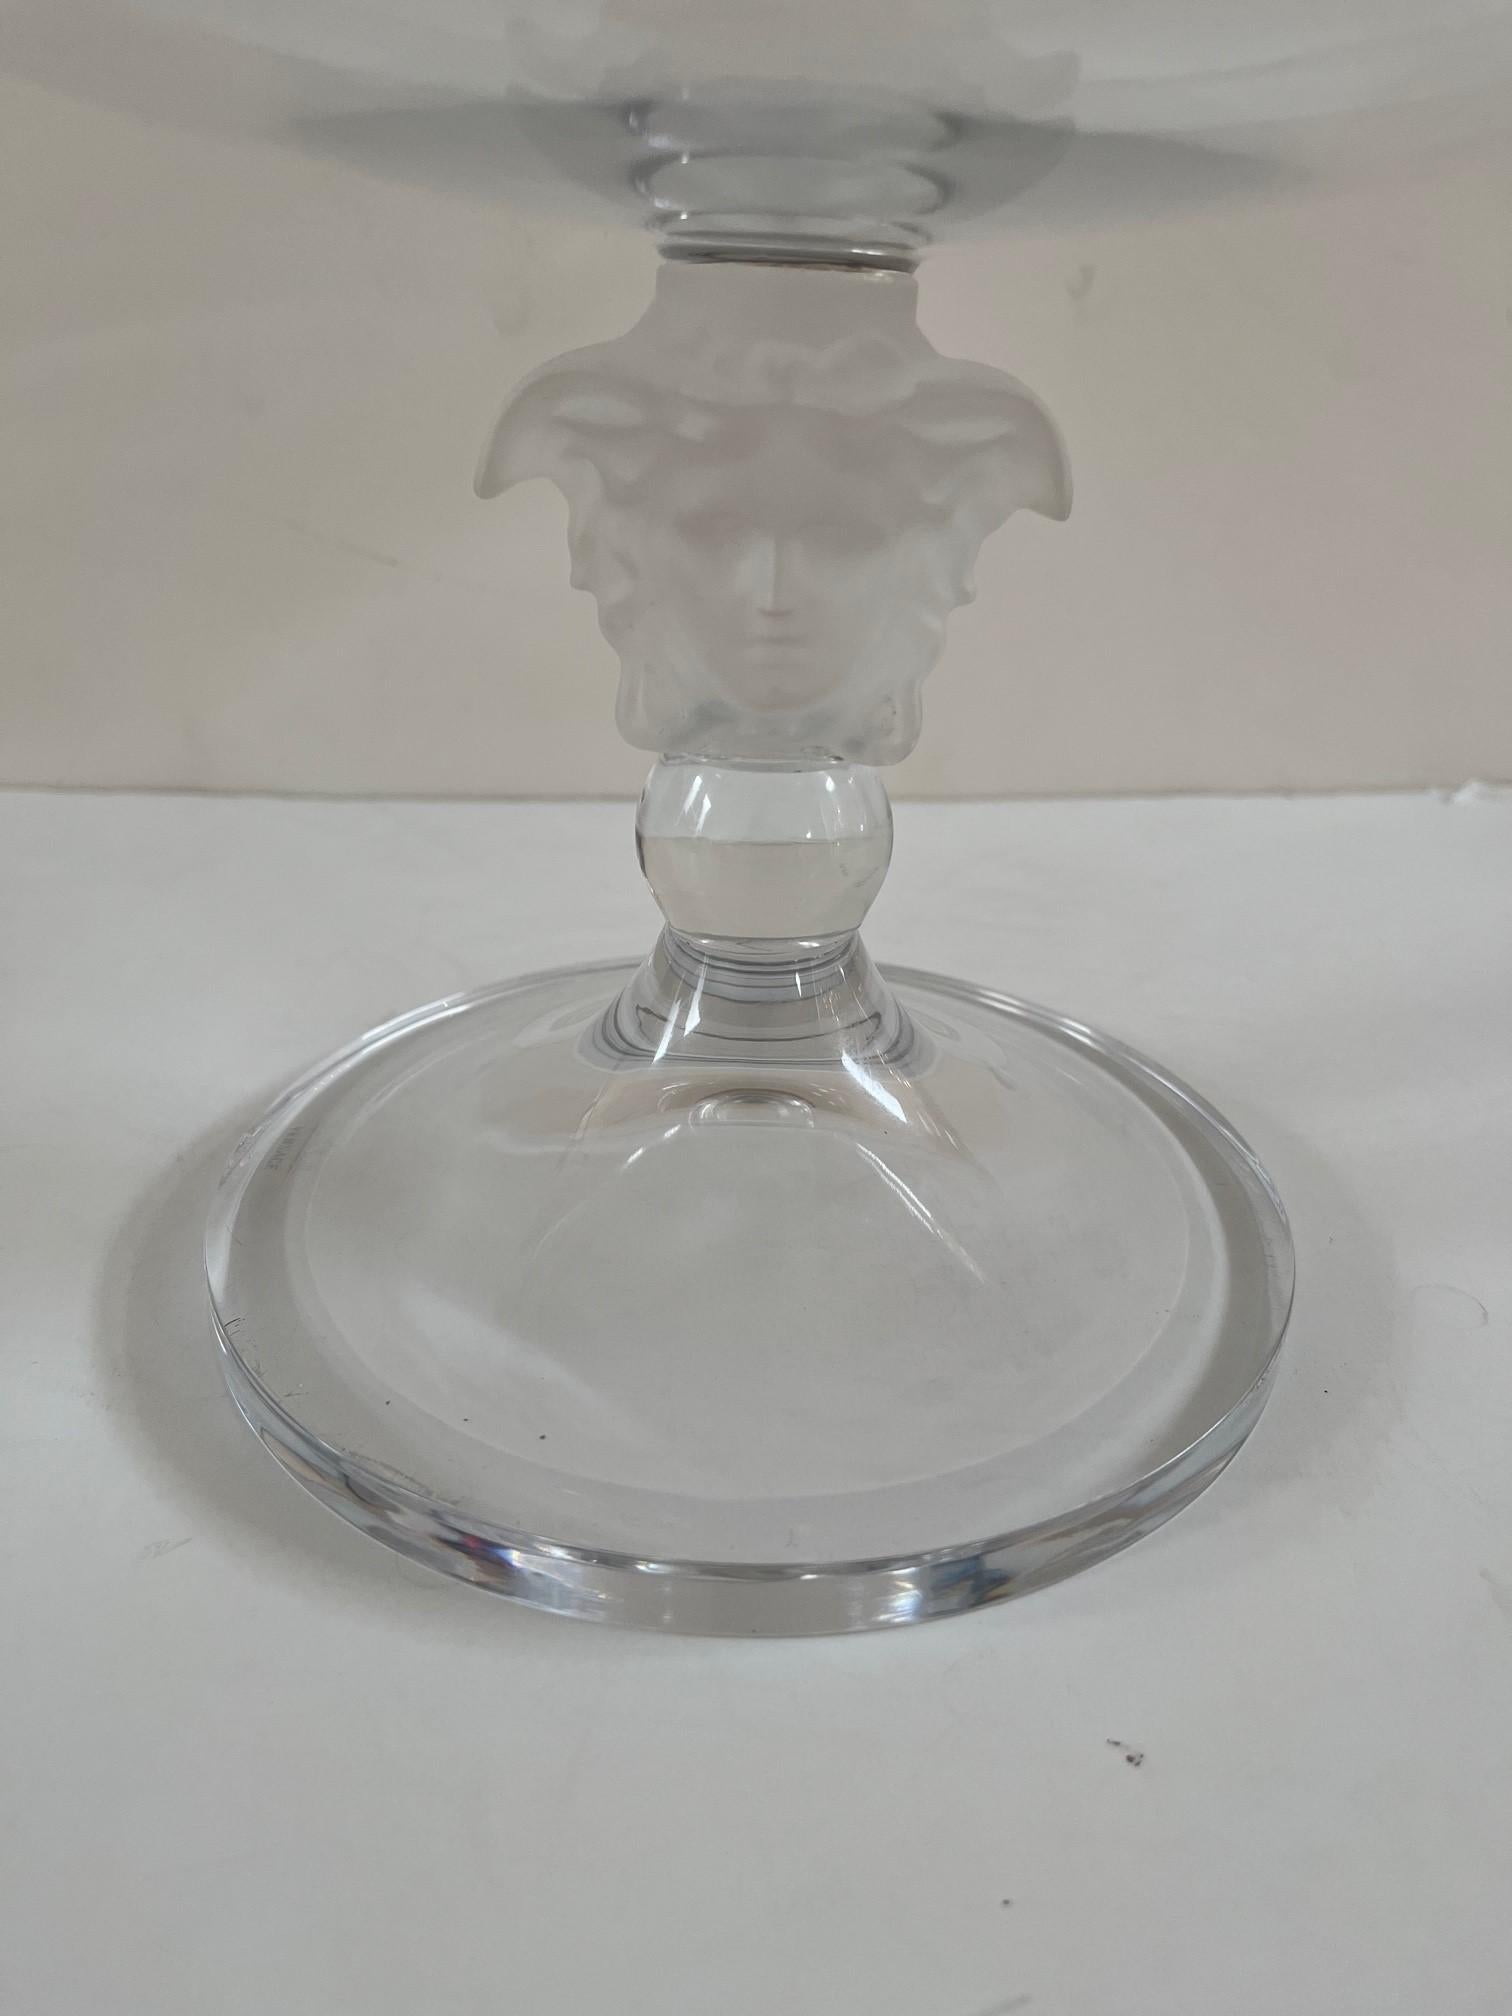 Versace Rosenthal Crystal Medusa Lumiere Footed Bowl, Shallow Bowl on Frosted Medusa Head Stem, Clear Glass Bowl raised upon Spreading Conical Base, in Original Box 